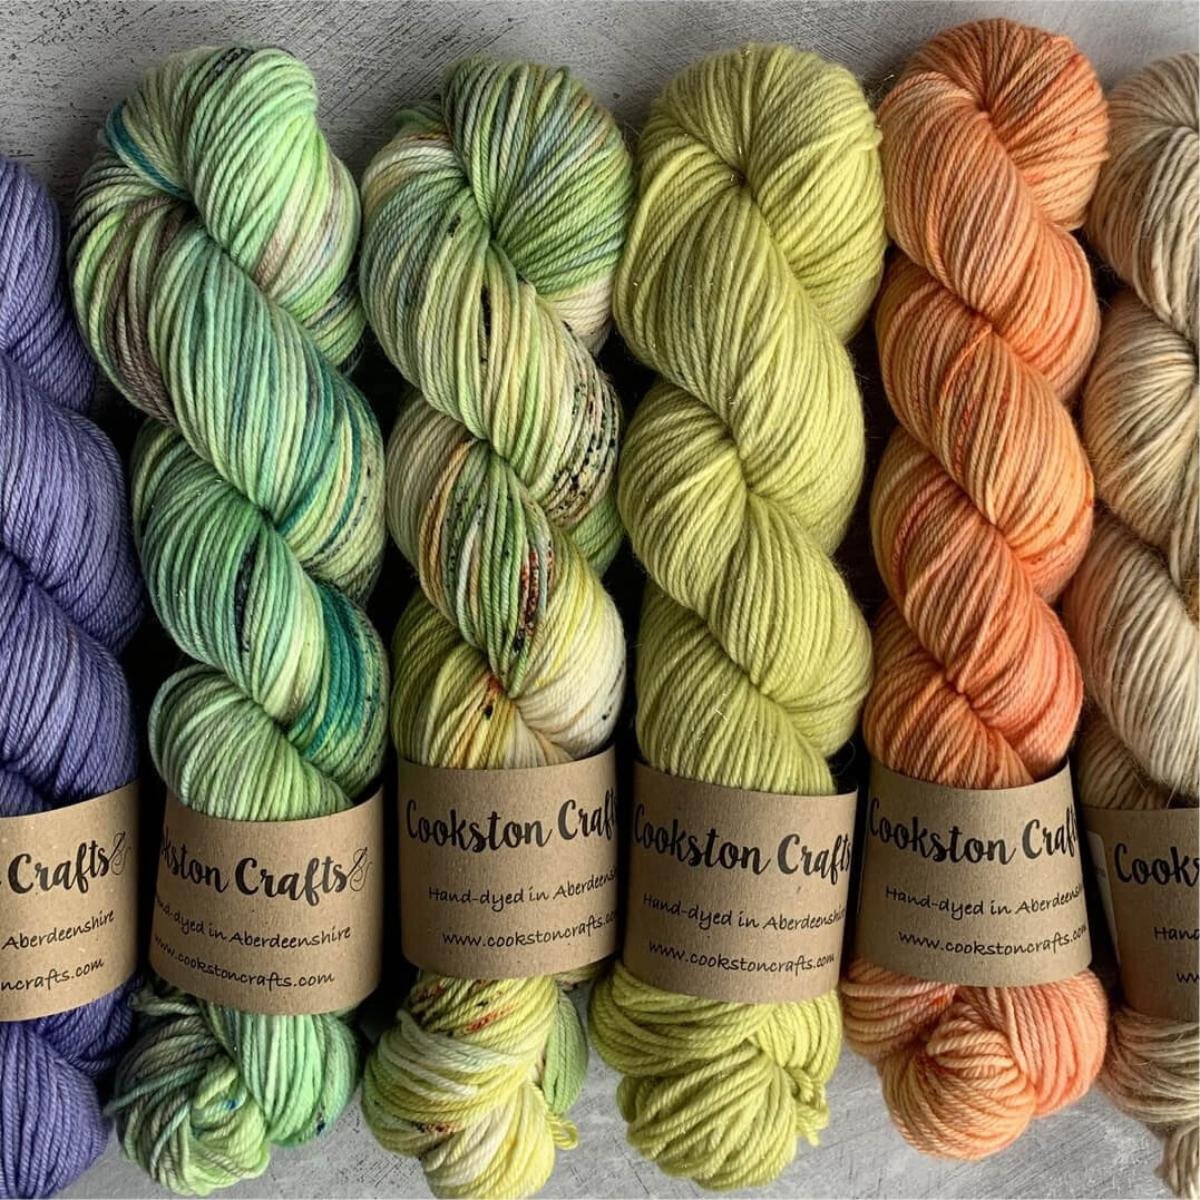 Cookston Crafts - Hand Dyed Yarn & Knitting and Crochet Workshops -  Aberdeenshire Scotland